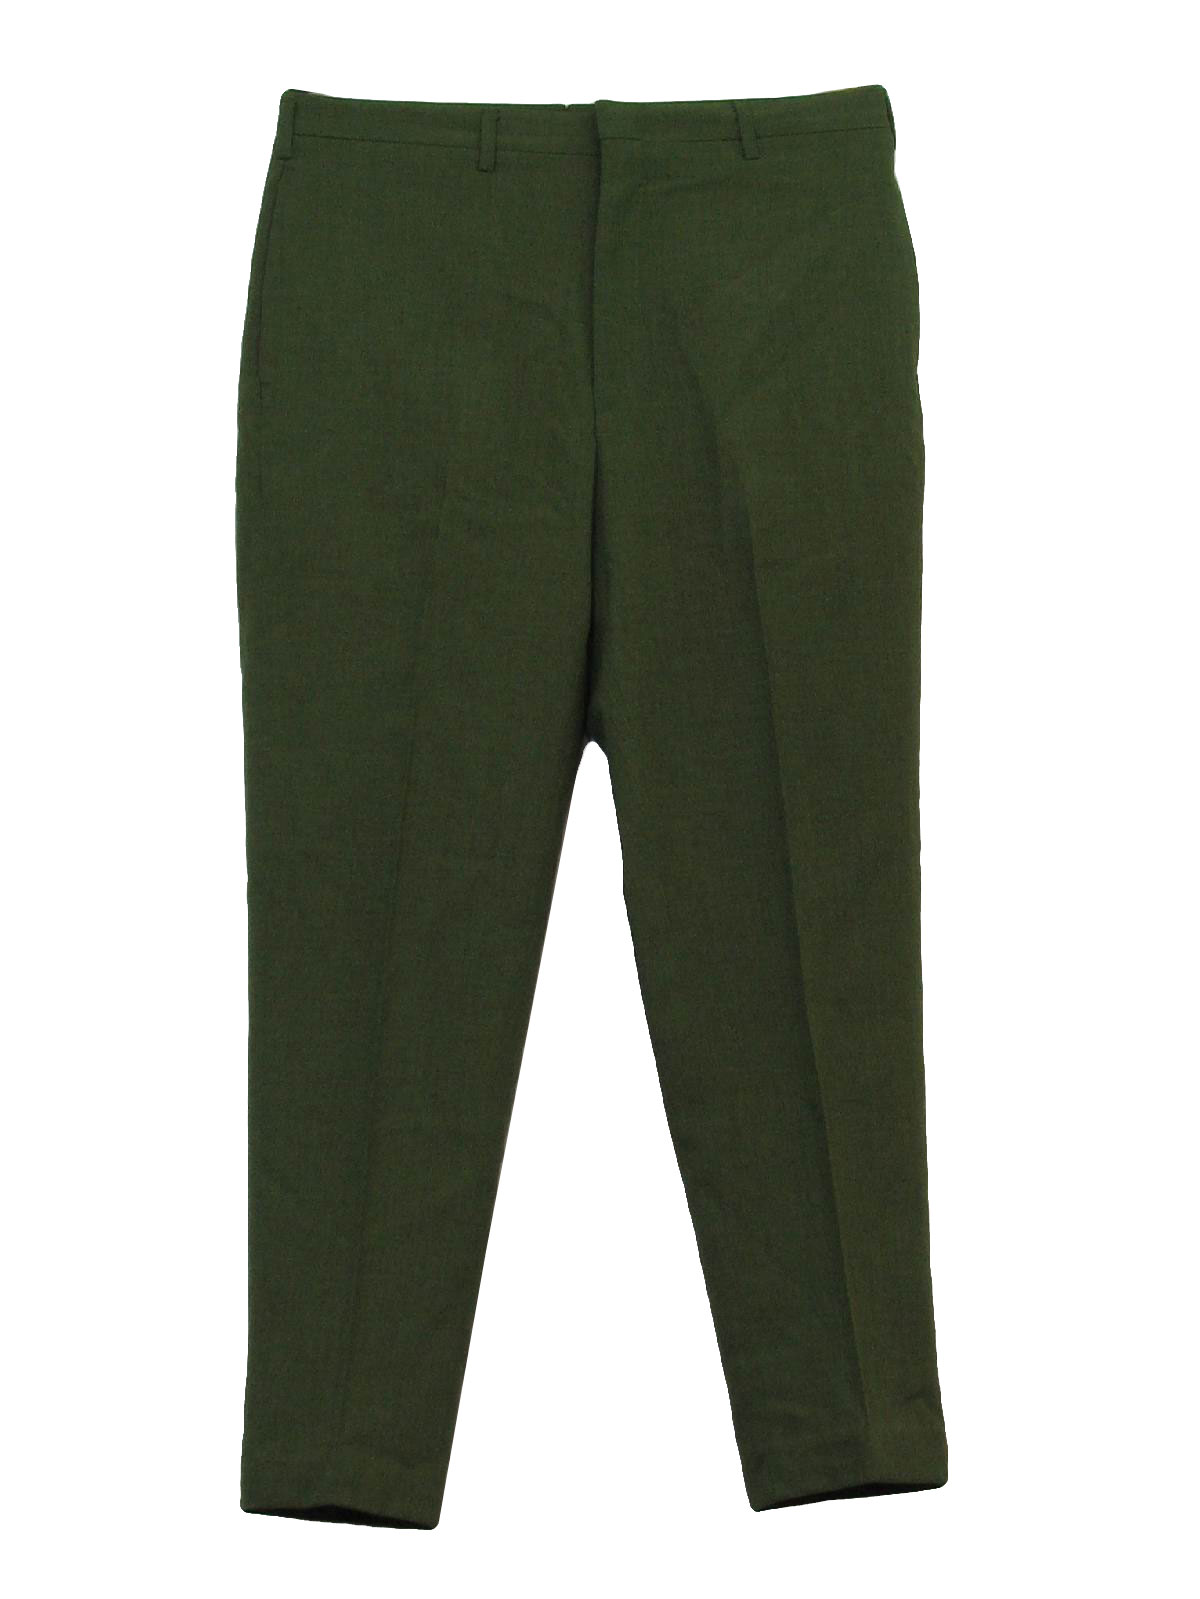 1960s Vintage Pants: 60s -Towncraft- Mens green wool and cotton blend ...